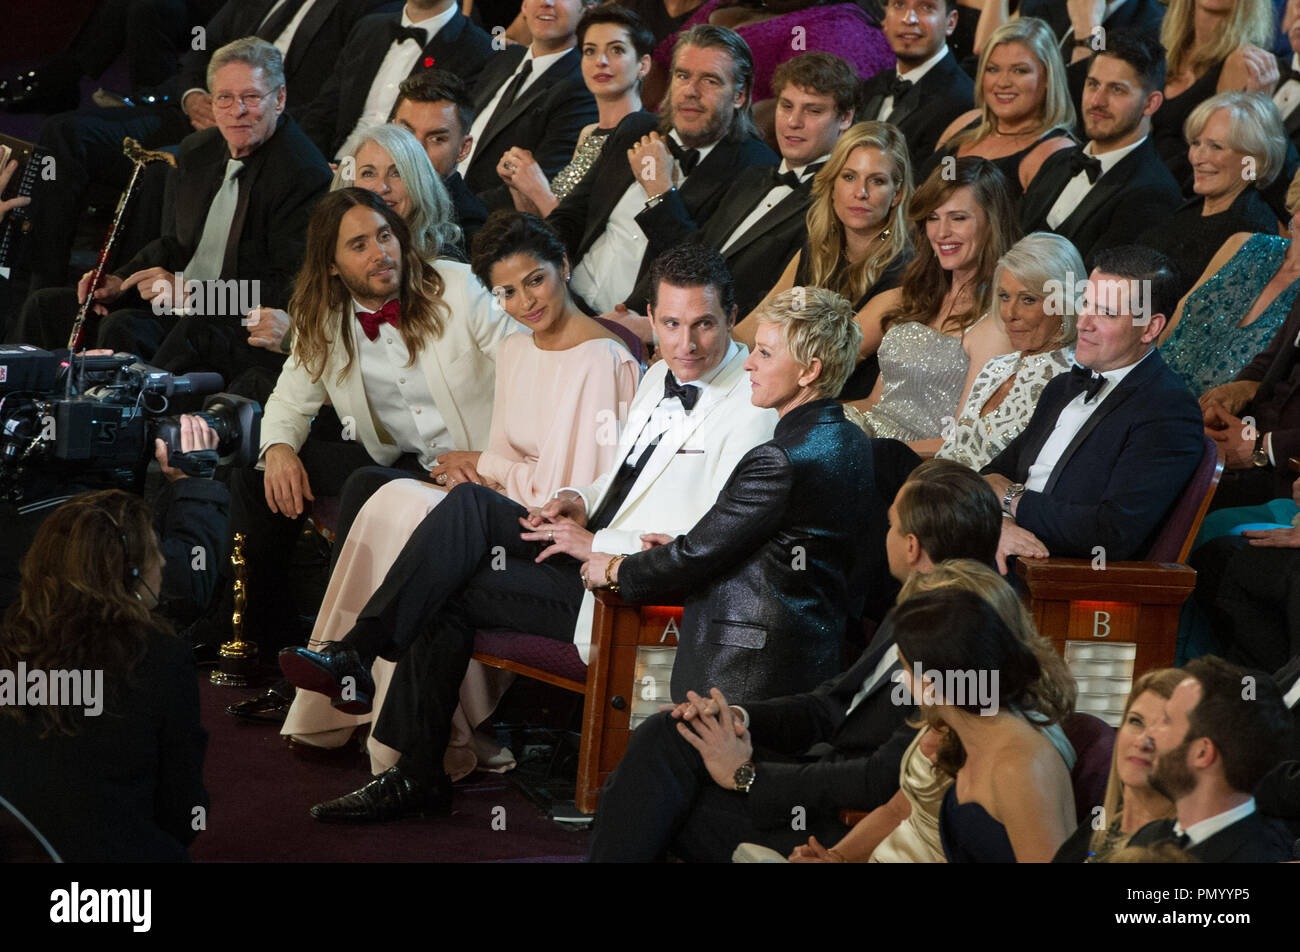 Oscar Winner Jared Leto, Camila Alves, and Oscar Winner Matthew McConaughey observe Ellen Degeneres during the live ABC Telecast of The Oscars® from the Dolby® Theater in Hollywood, CA Sunday, March 2, 2014.  File Reference # 32268 588  For Editorial Use Only -  All Rights Reserved Stock Photo